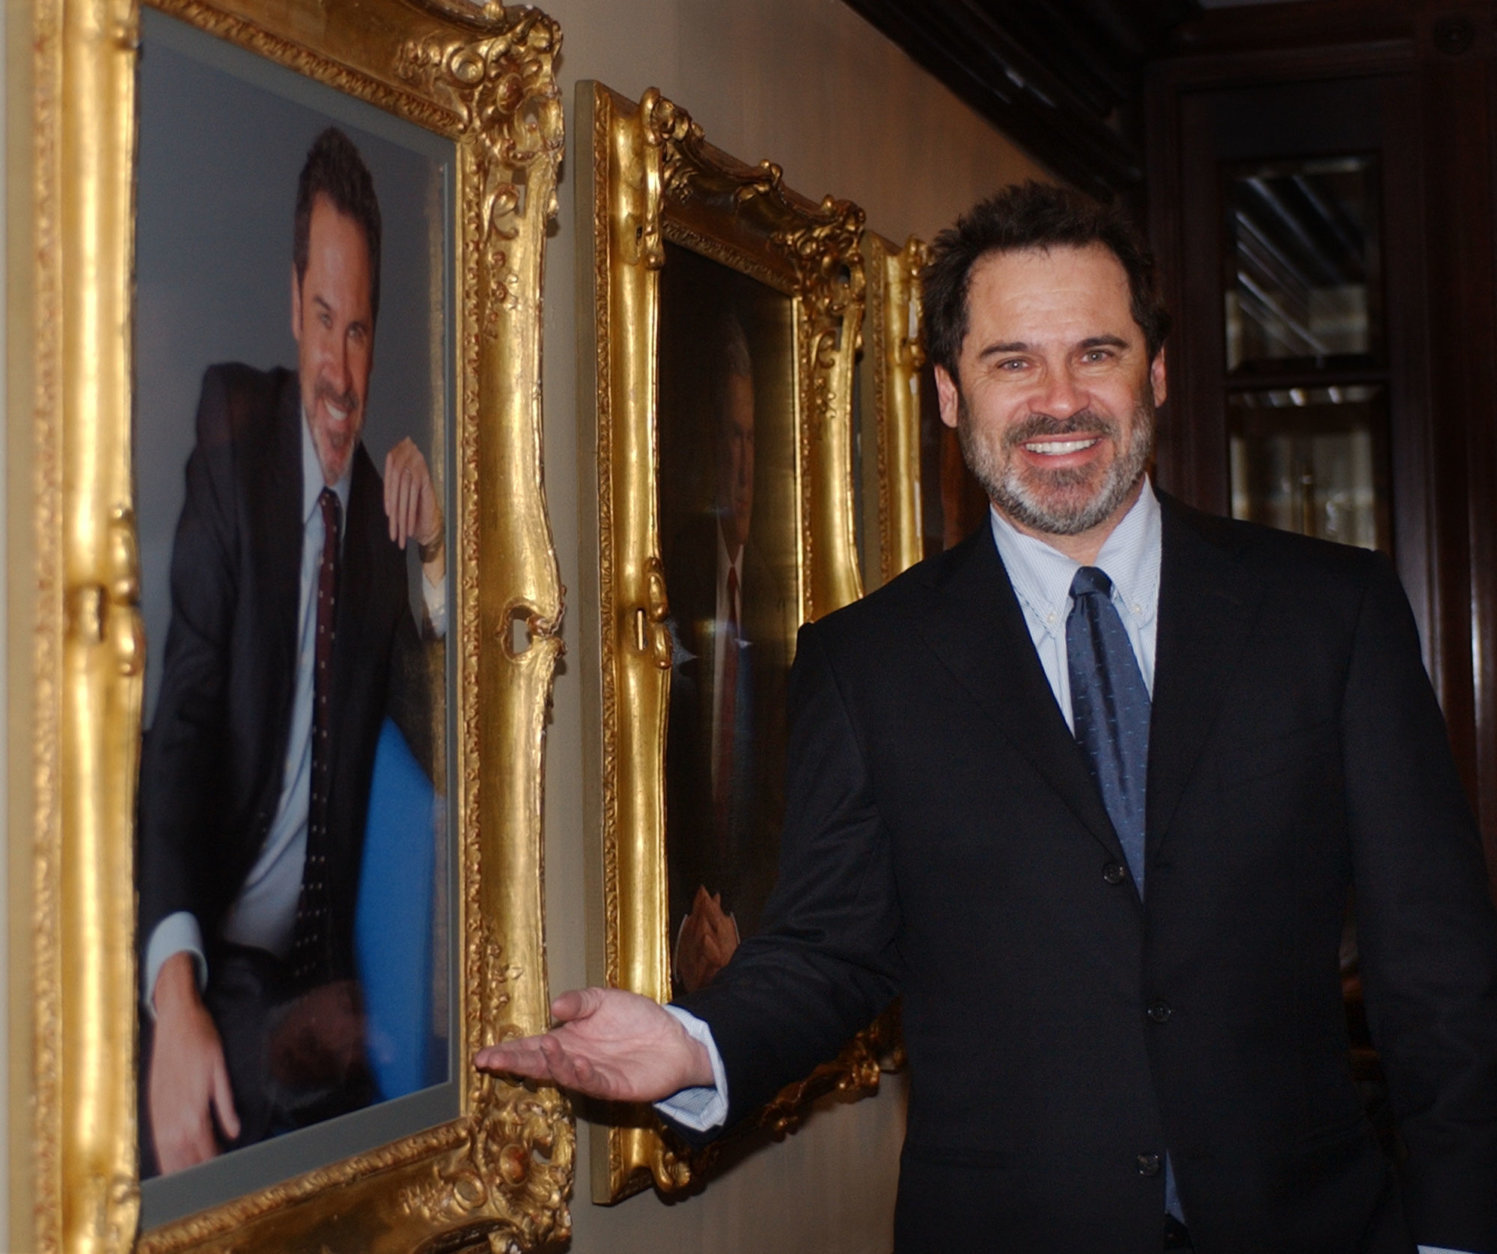 ** ADVACNE FOR MONDAY, JAN 26 ** Dennis Miller poses in front of a portrait of himself hanging in the lobby of the Occidental Restaurant in Washington,  Jan. 21, 2004.  Miller is a familiar figure from his years on "Saturday Night Live," HBO and "Monday Night Football," but he will be in a different role on his topical CNBC talk show, which debuts Monday, Jan. 26, 2004 at 9 p.m. EST. (AP Photo/Susan Walsh)